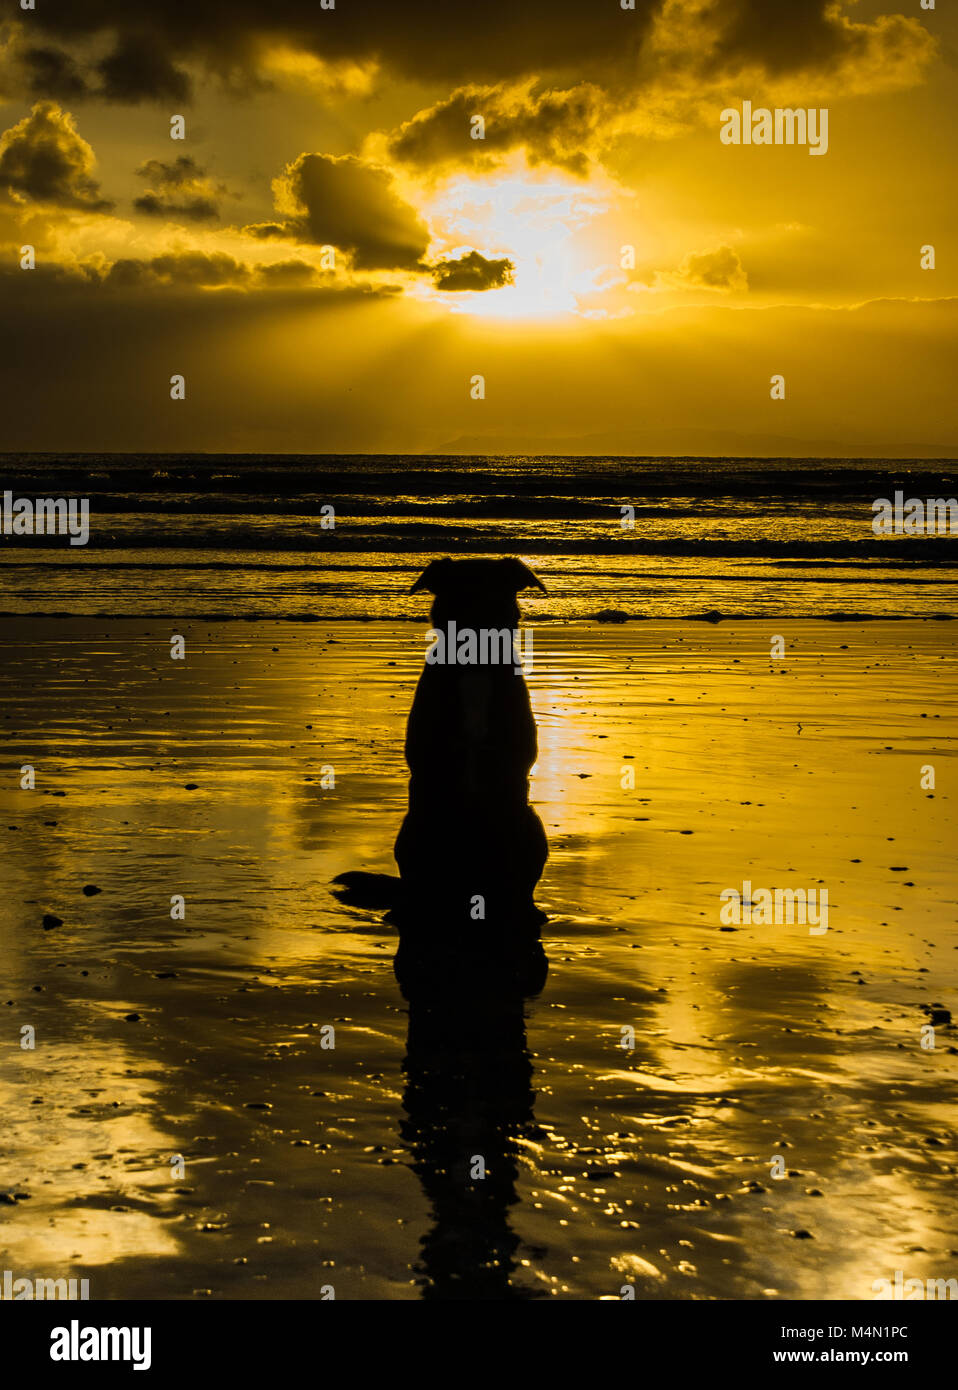 The Golden Dog - Staring at the Sunset Stock Photo